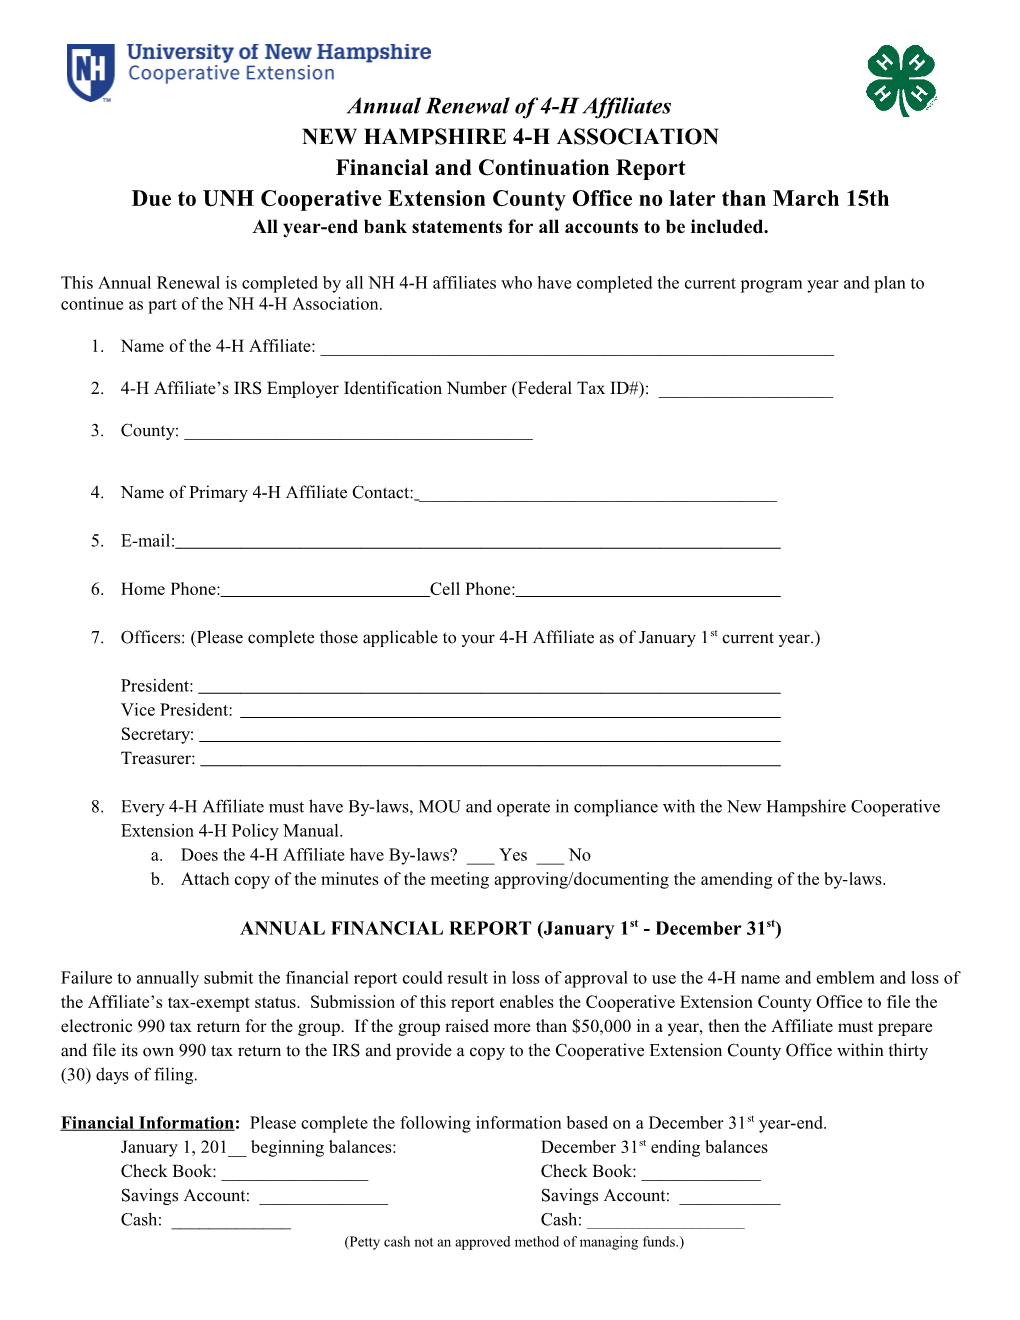 NH 4-H Association: Financial Reporting for Affiliates